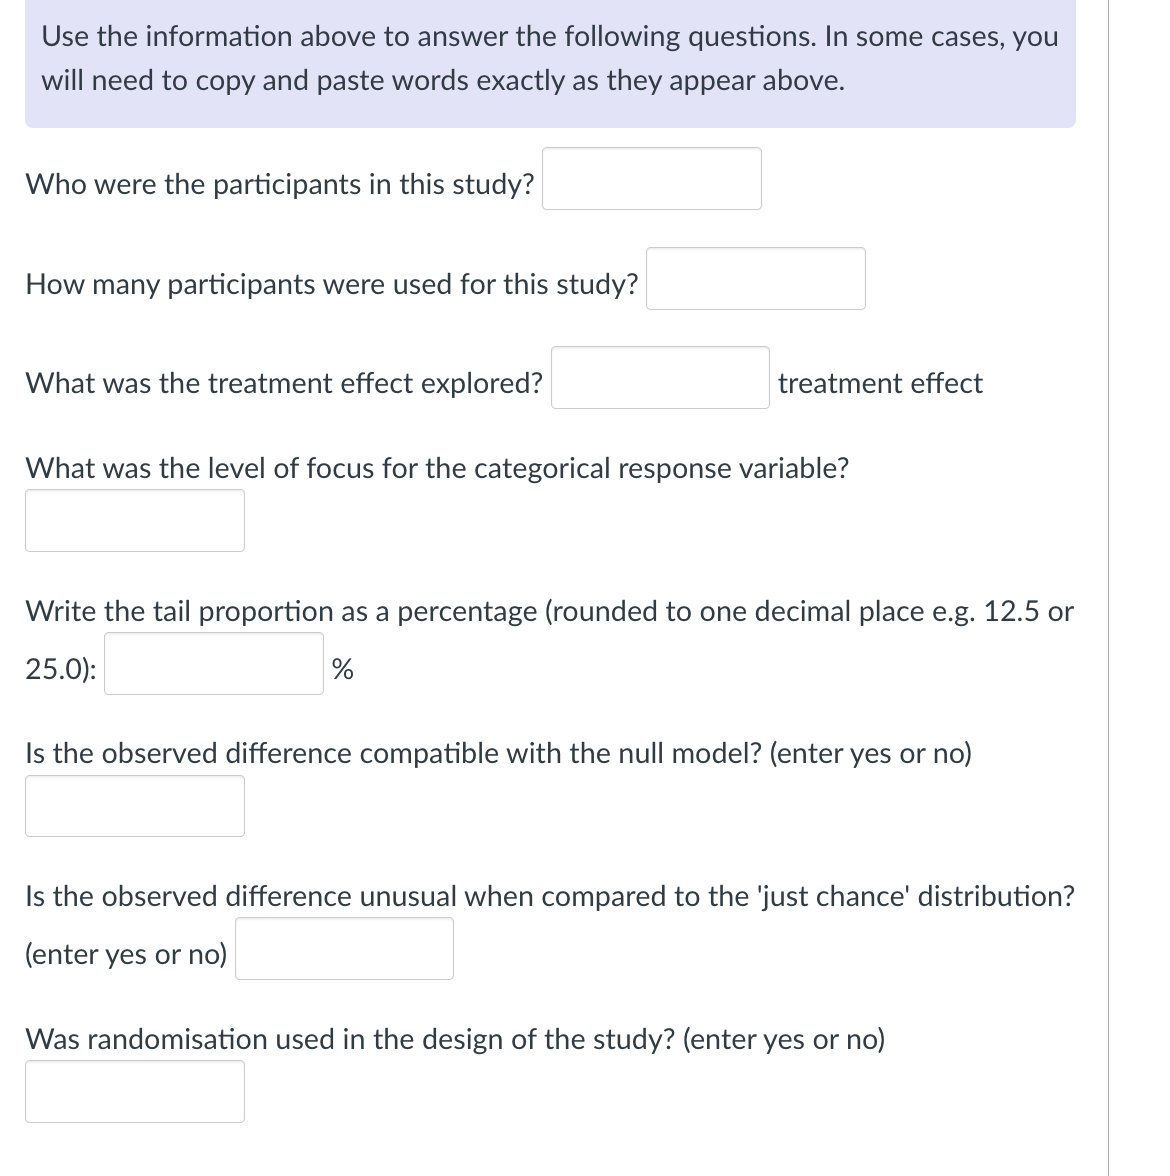 Use the information above to answer the following questions. In some cases, you
will need to copy and paste words exactly as they appear above.
Who were the participants in this study?
How many participants were used for this study?
What was the treatment effect explored?
treatment effect
What was the level of focus for the categorical response variable?
Write the tail proportion as a percentage (rounded to one decimal place e.g. 12.5 or
25.0):
%
Is the observed difference compatible with the null model? (enter yes or no)
Is the observed difference unusual when compared to the 'just chance' distribution?
(enter yes or no)
Was randomisation used in the design of the study? (enter yes or no)